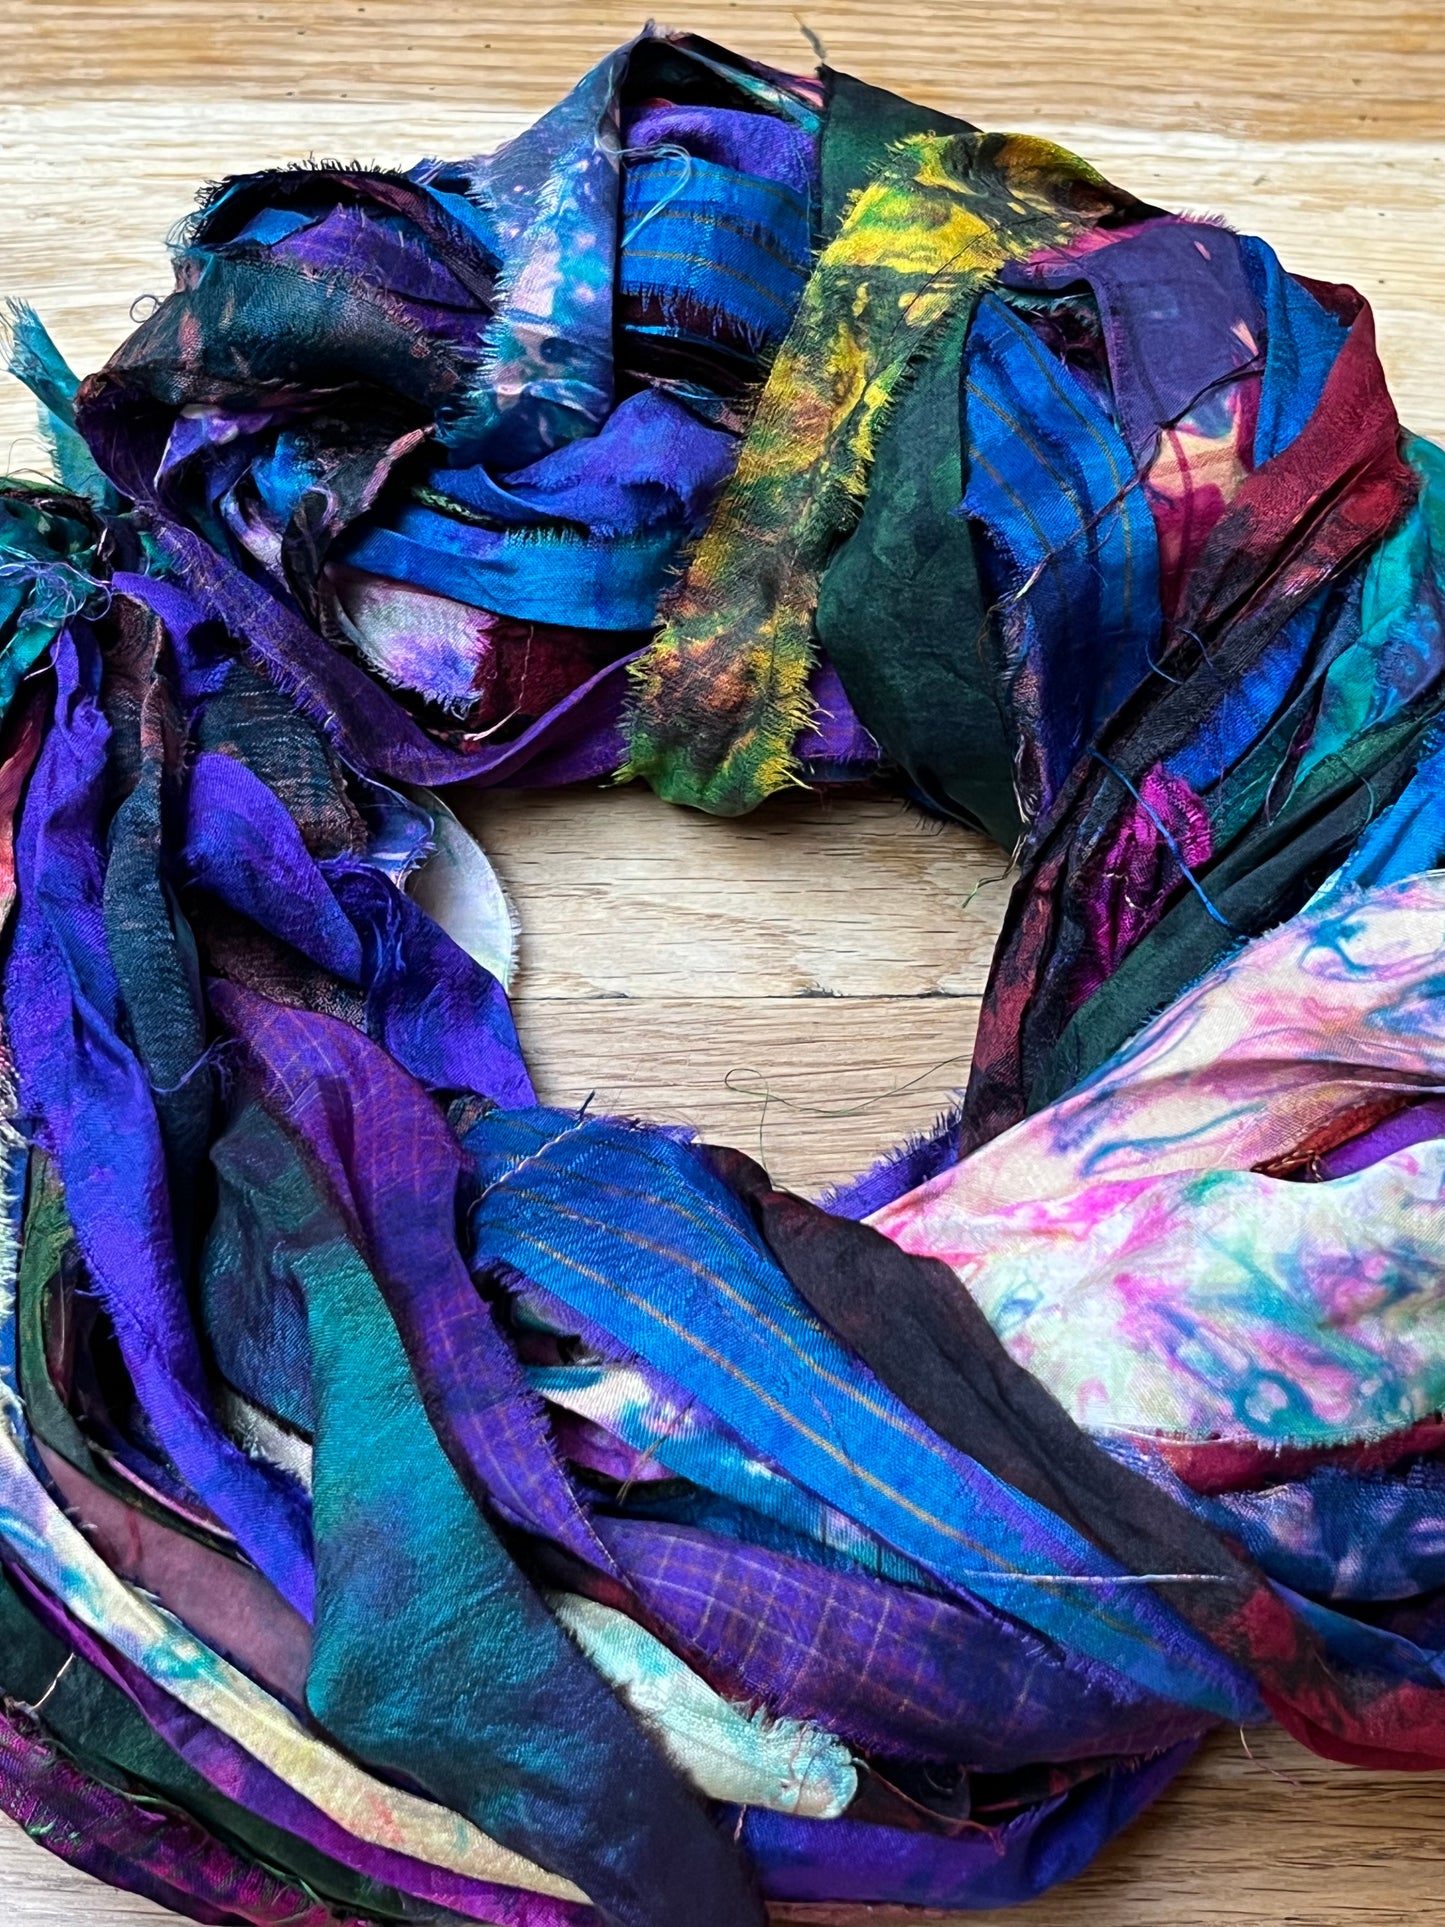 Sari silk ribbon expertly tie dyed by artisans in india.